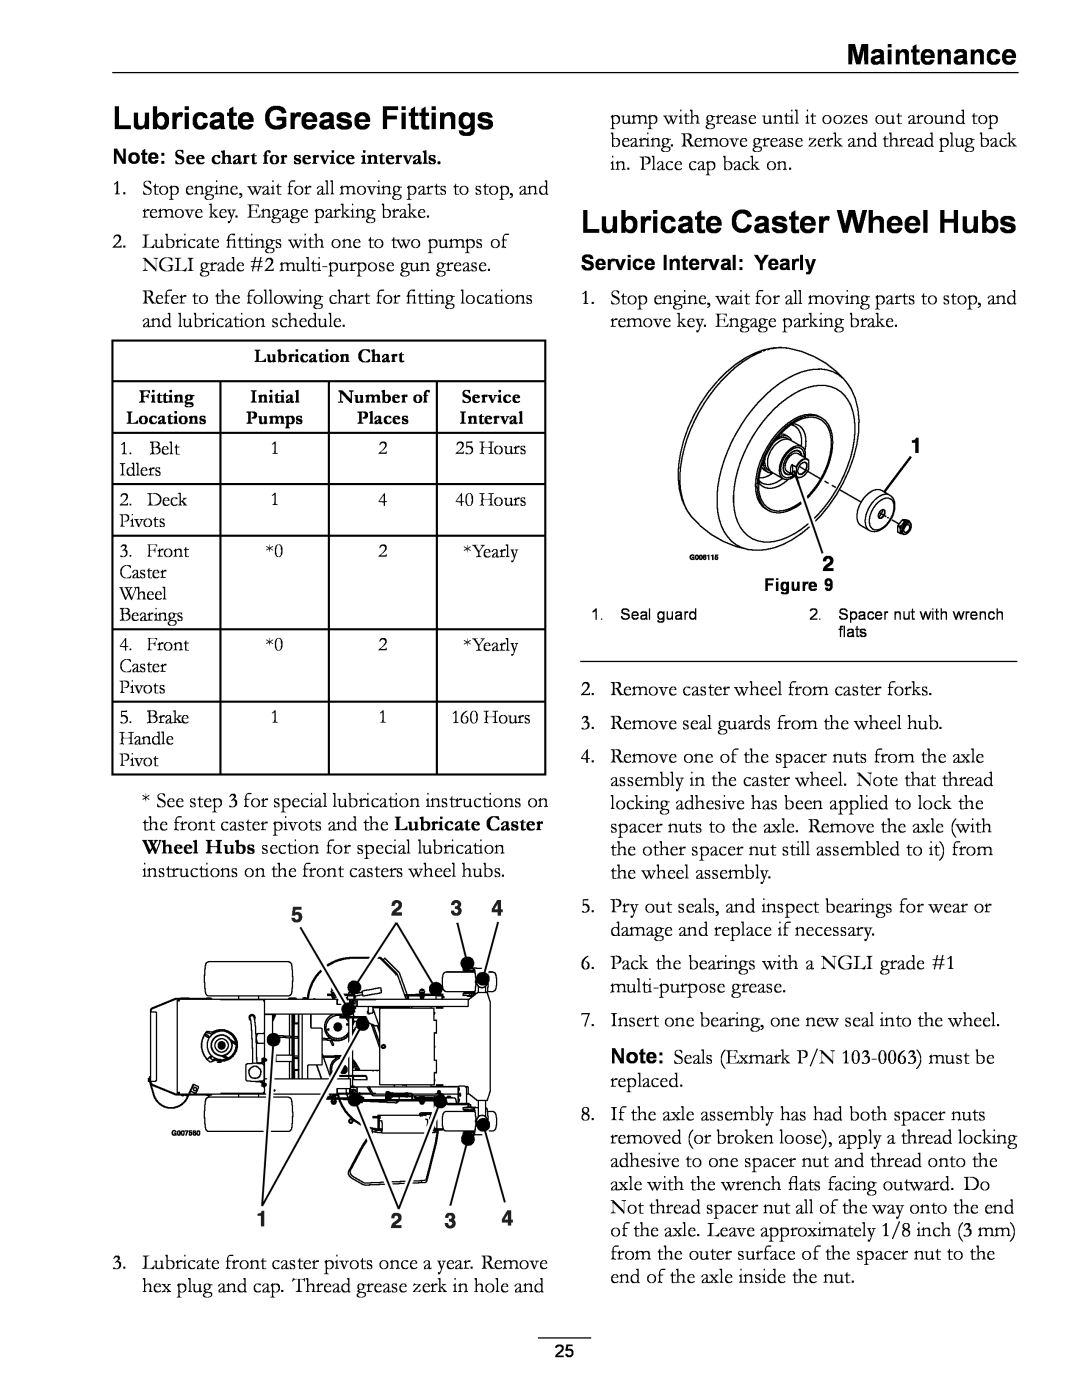 Exmark Phazer Lubricate Grease Fittings, Lubricate Caster Wheel Hubs, Note See chart for service intervals, Maintenance 